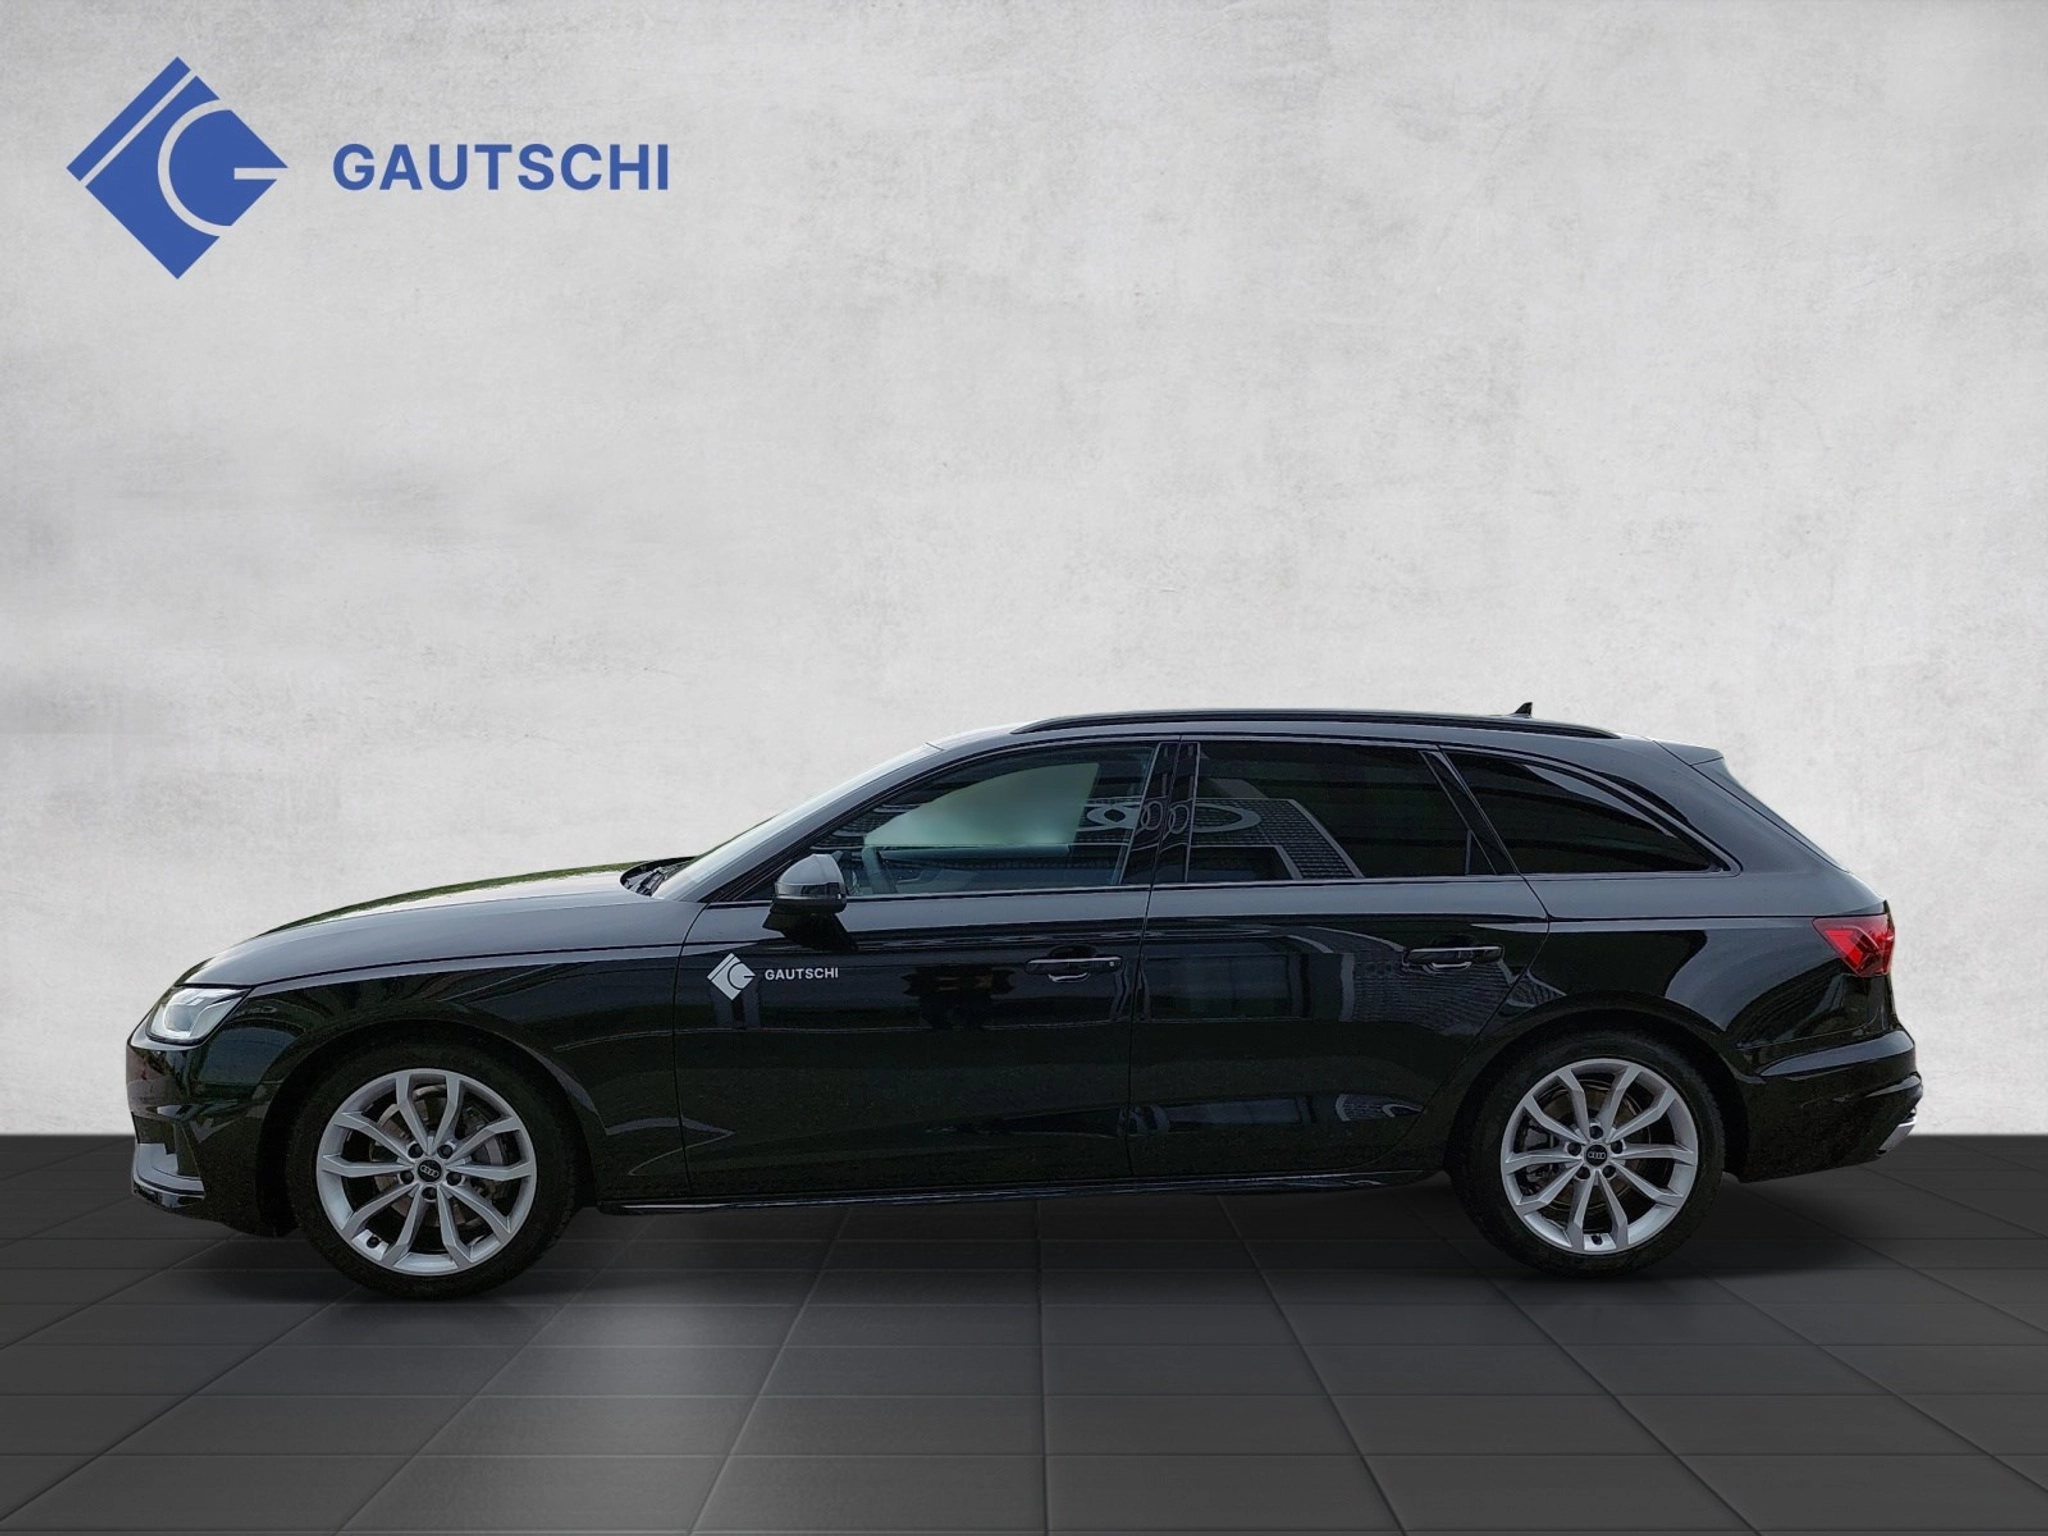 Audi A4 Leasing in Switzerland from CHF 266 